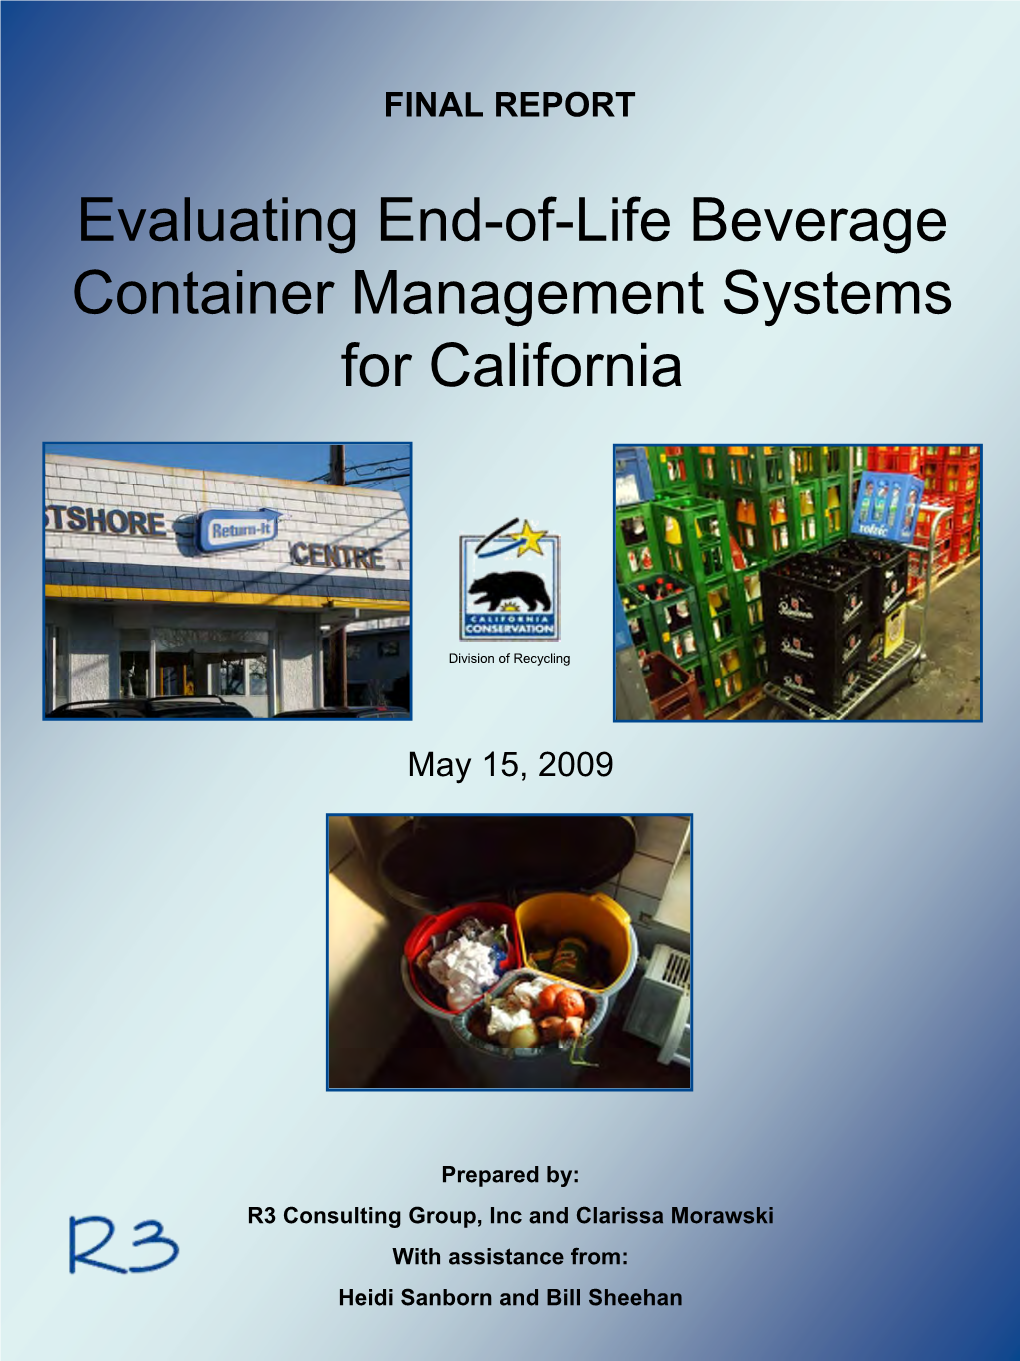 Evaluating End-Of-Life Beverage Container Management Systems for California